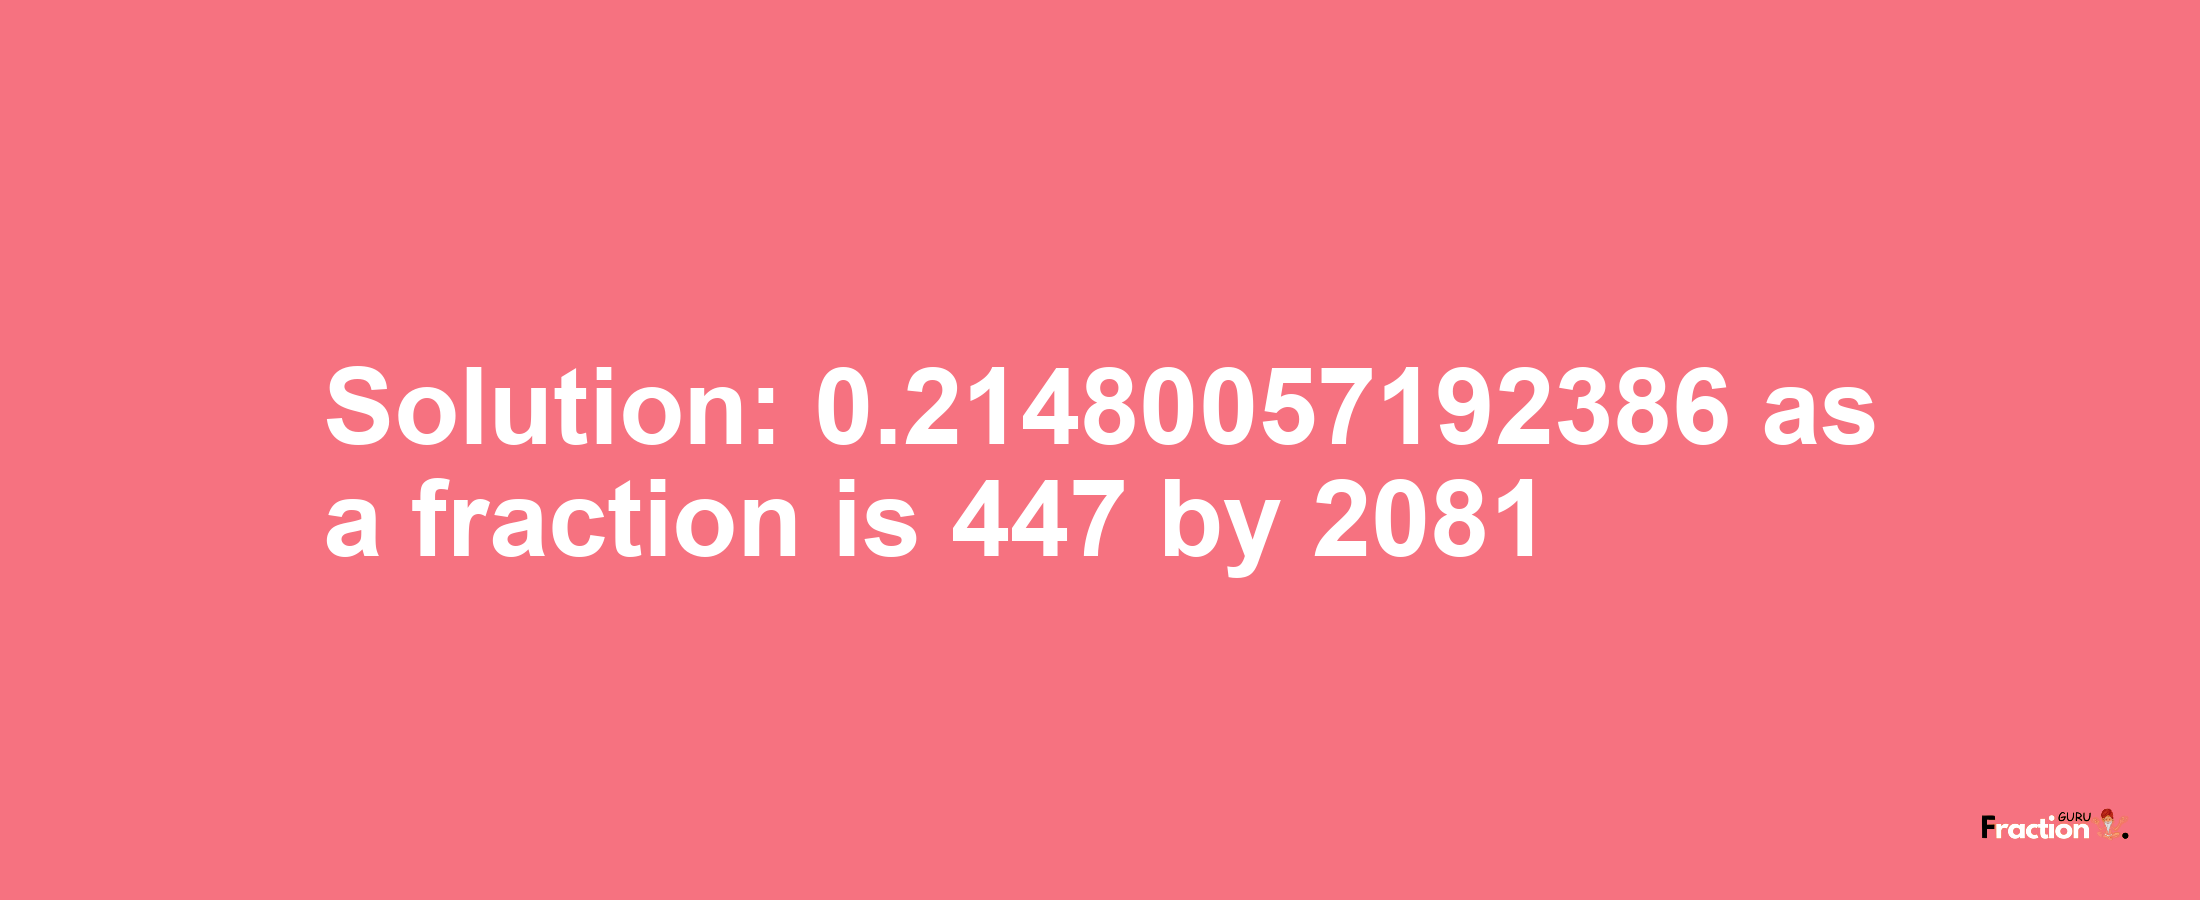 Solution:0.21480057192386 as a fraction is 447/2081